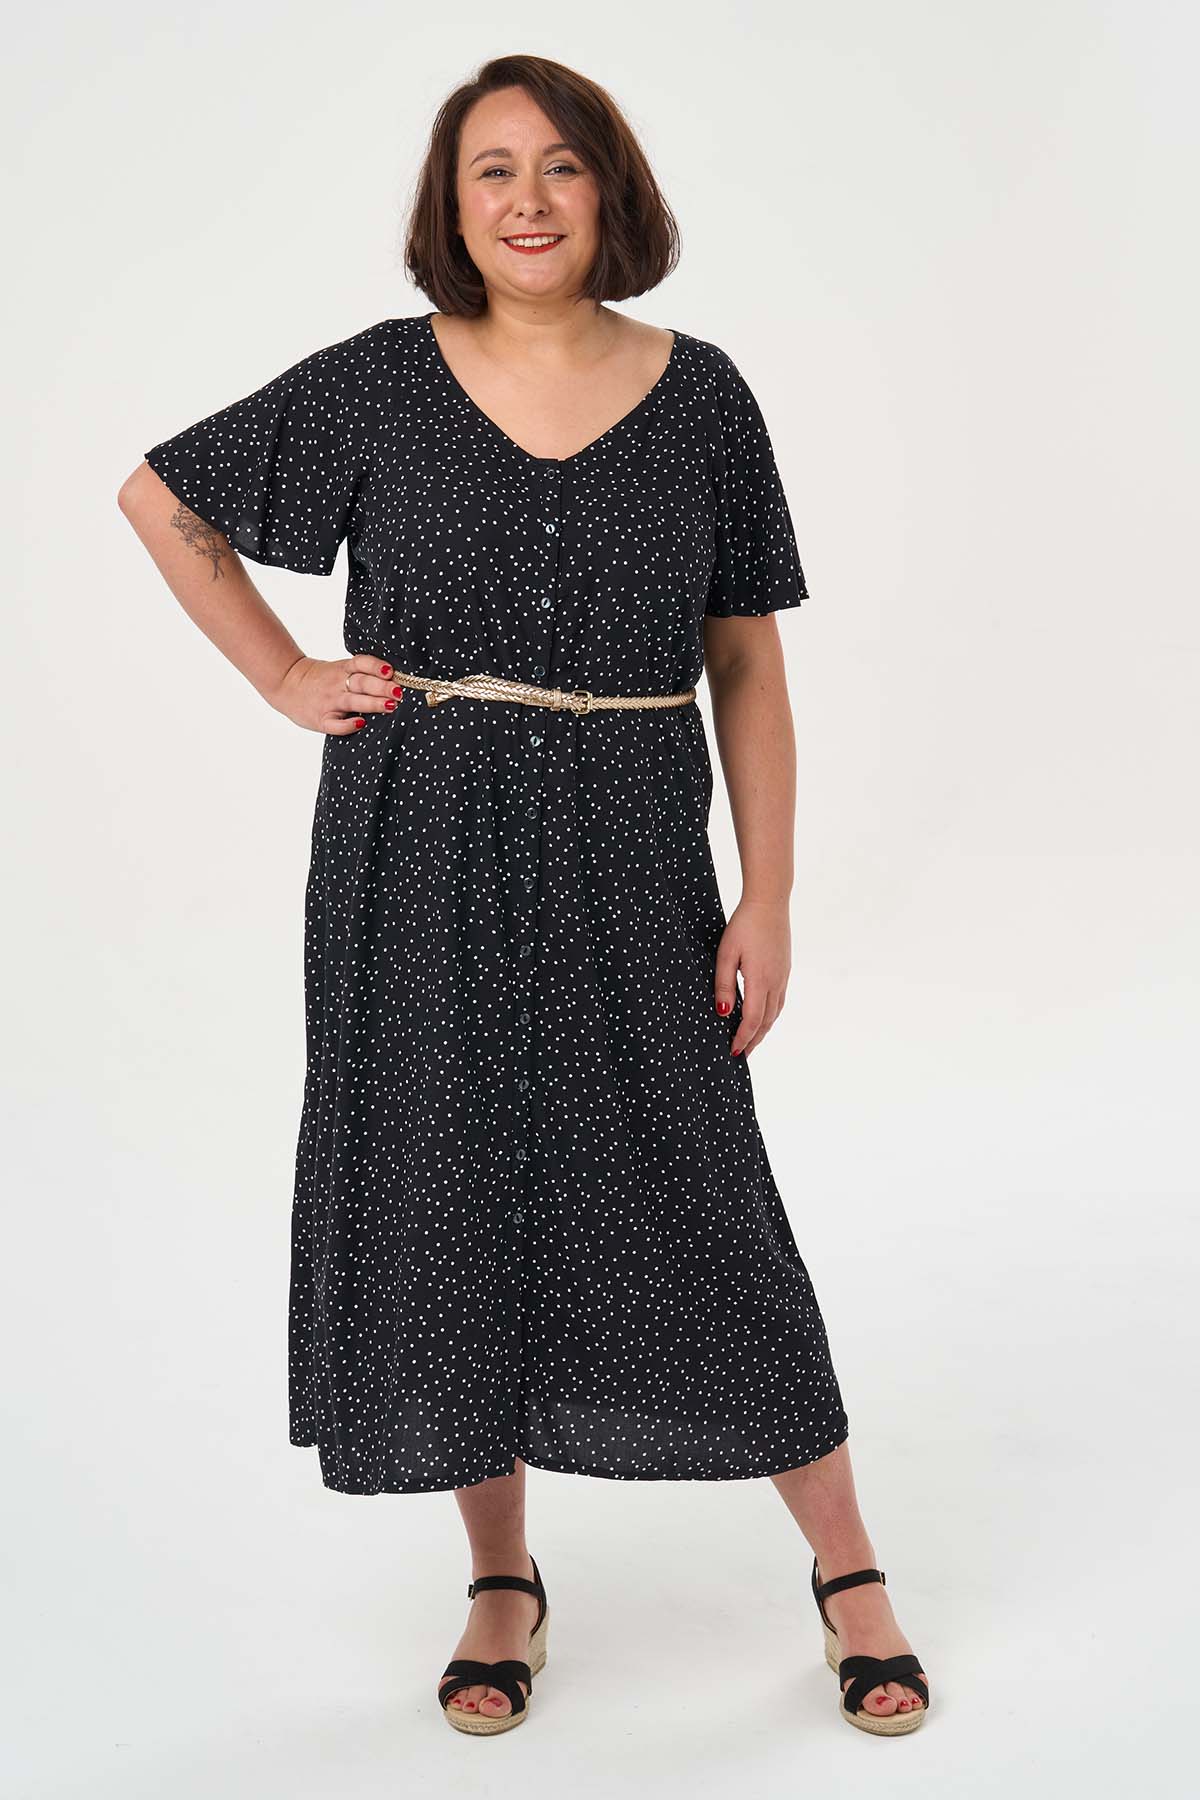 Sew Over It - Isabelle Blouse & Dress